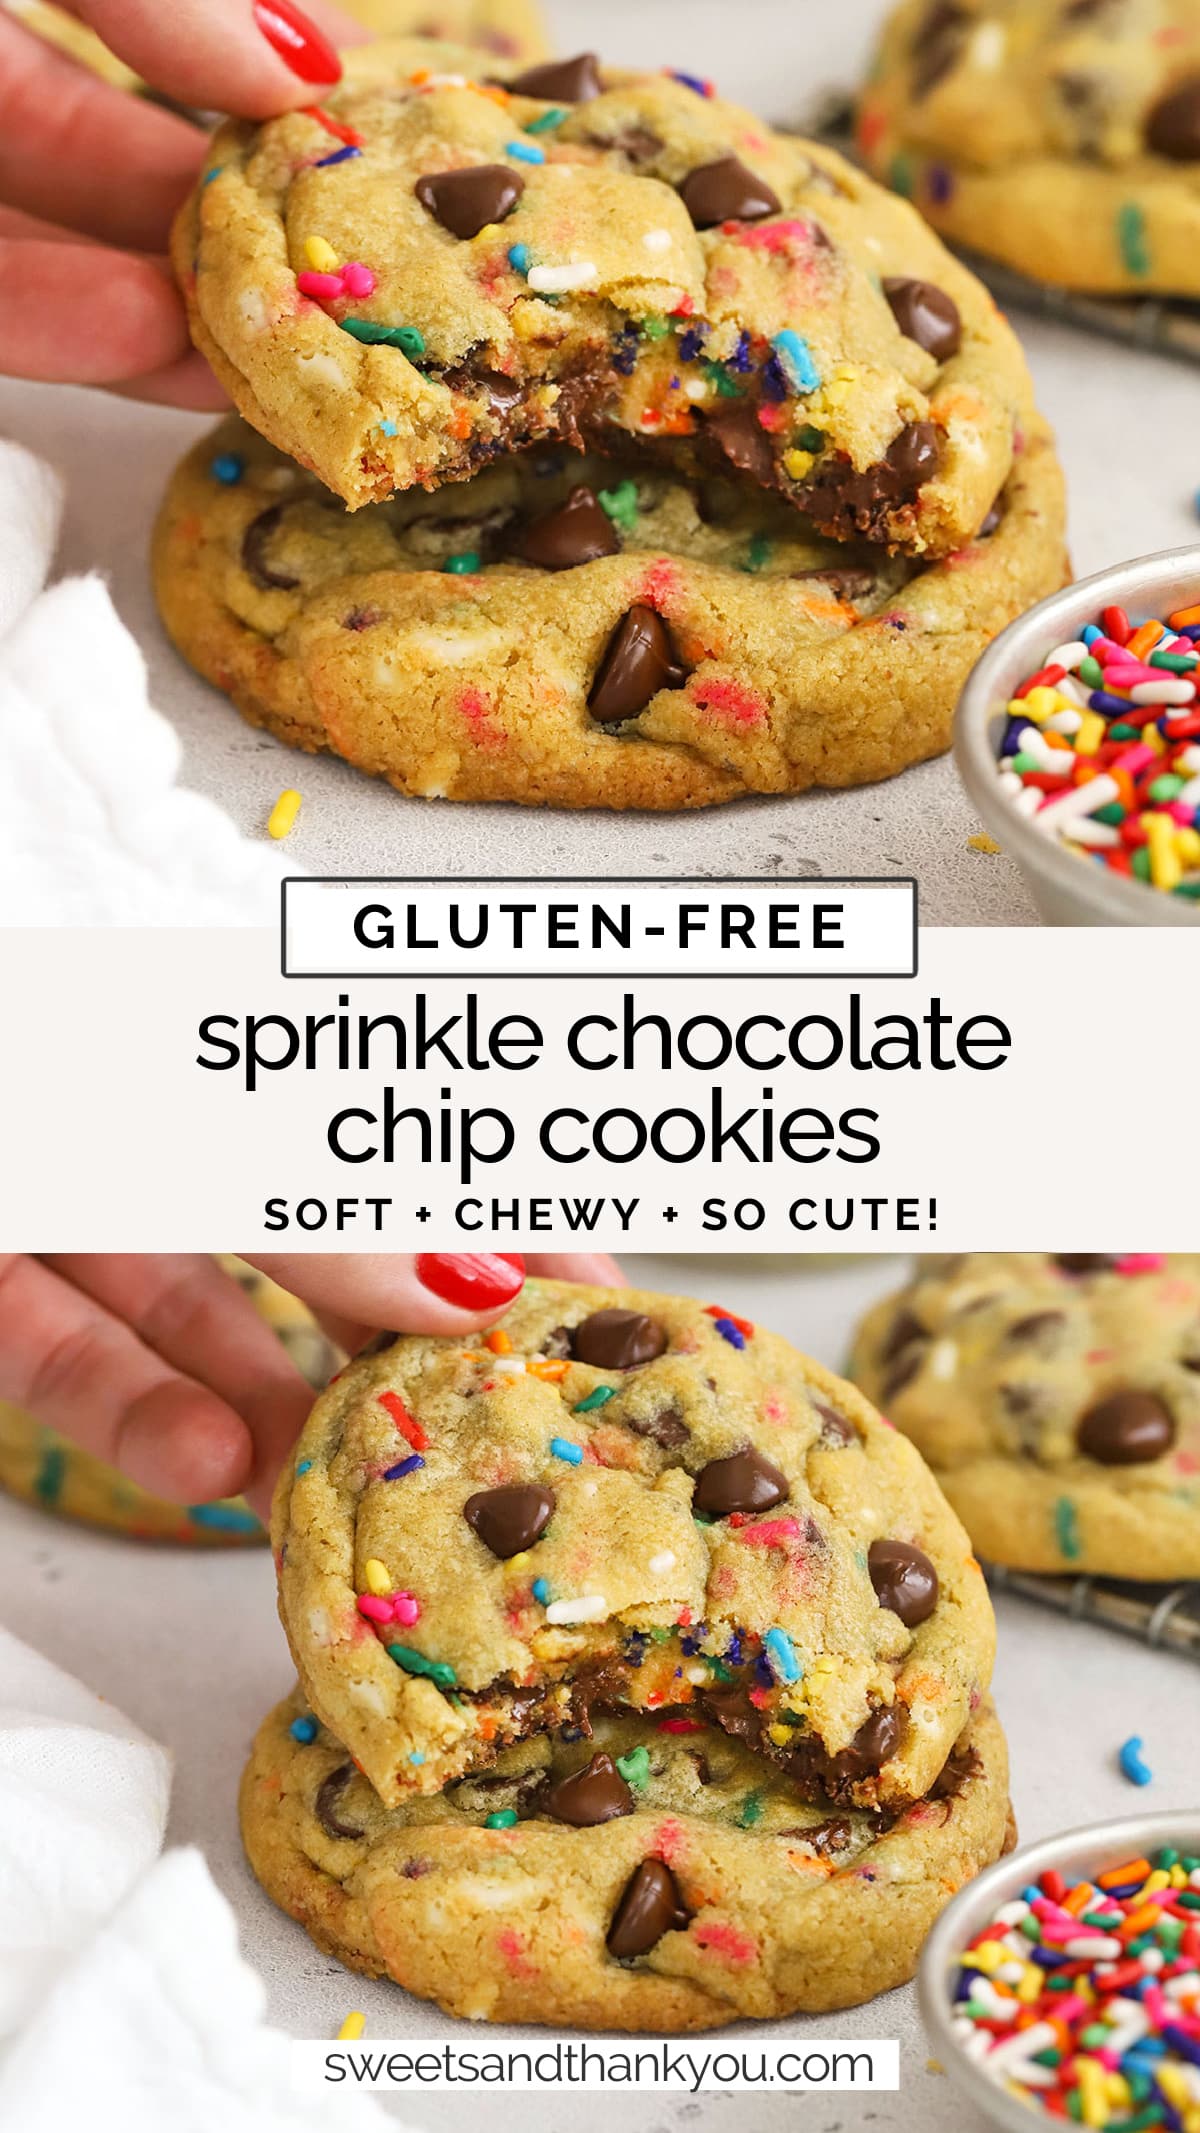 These gluten-free sprinkle chocolate chip cookies are SO MUCH FUN to make and eat! These classic gluten-free chocolate chip cookies with sprinkles add a fun touch to any celebration! / gluten-free birthday cake chocolate chip cookies recipe / gluten-free funfetti chocolate chip cookies recipe / gluten-free chocolate chip cookies recipe / gluten-free cookies with sprinkles / 